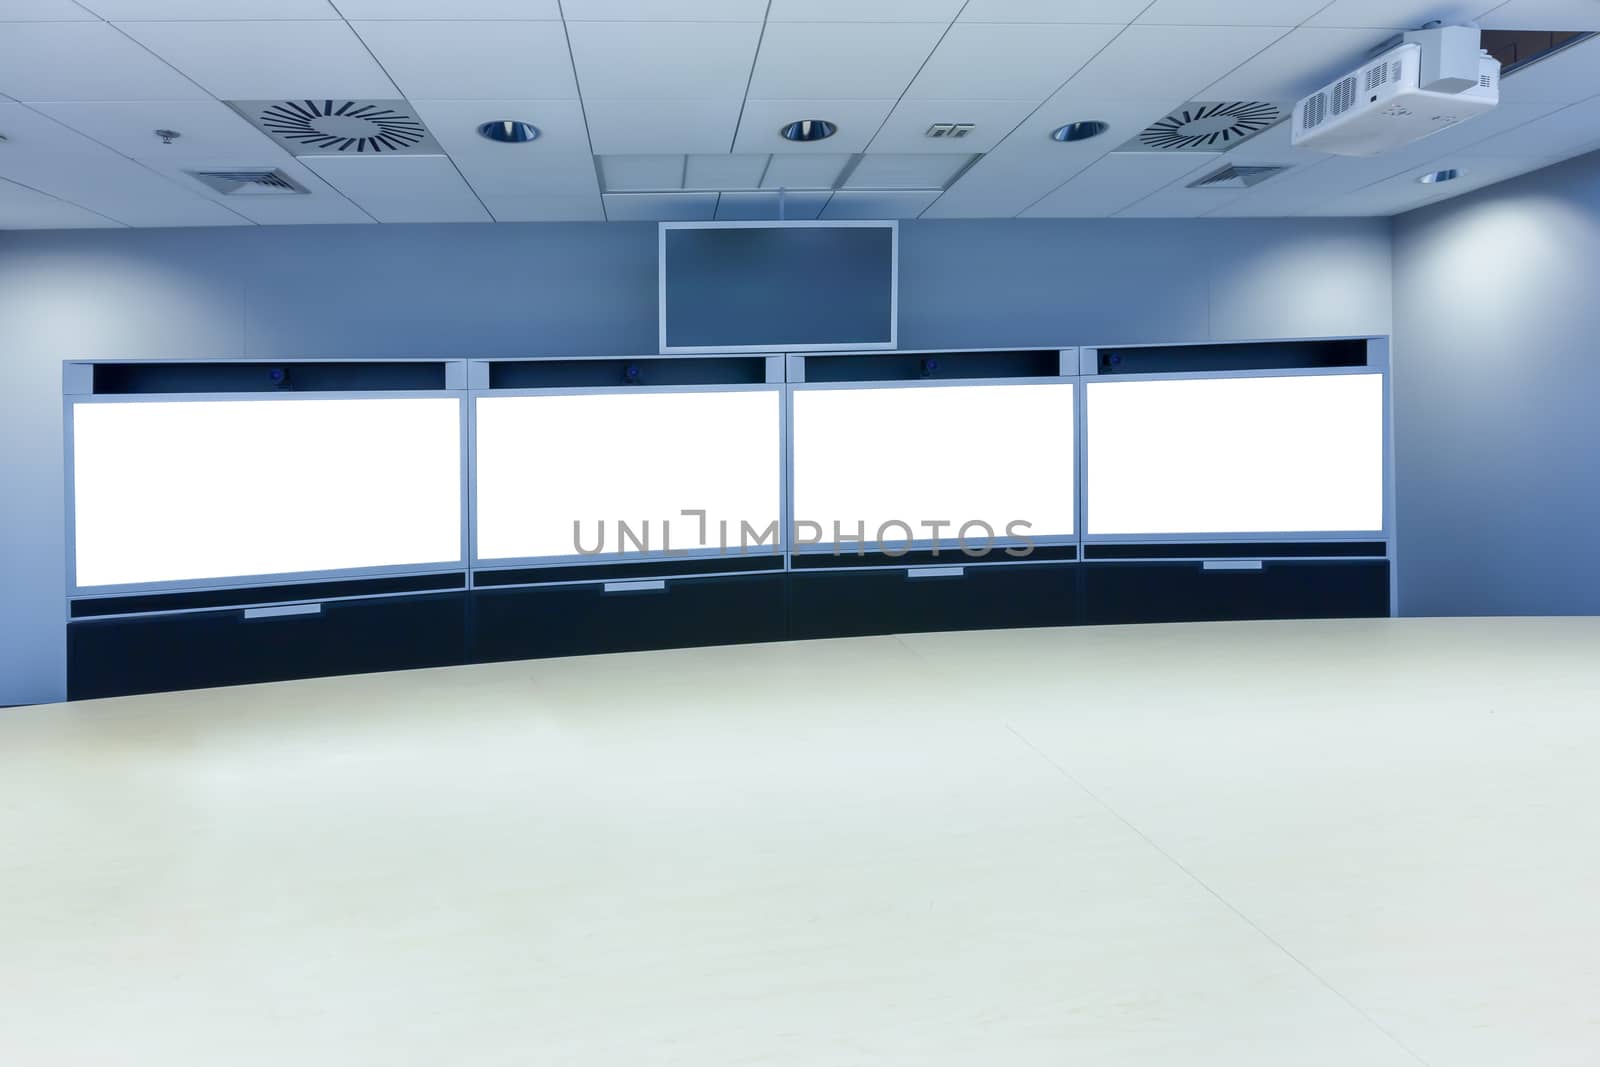 teleconferencing and telepresence business meeting room